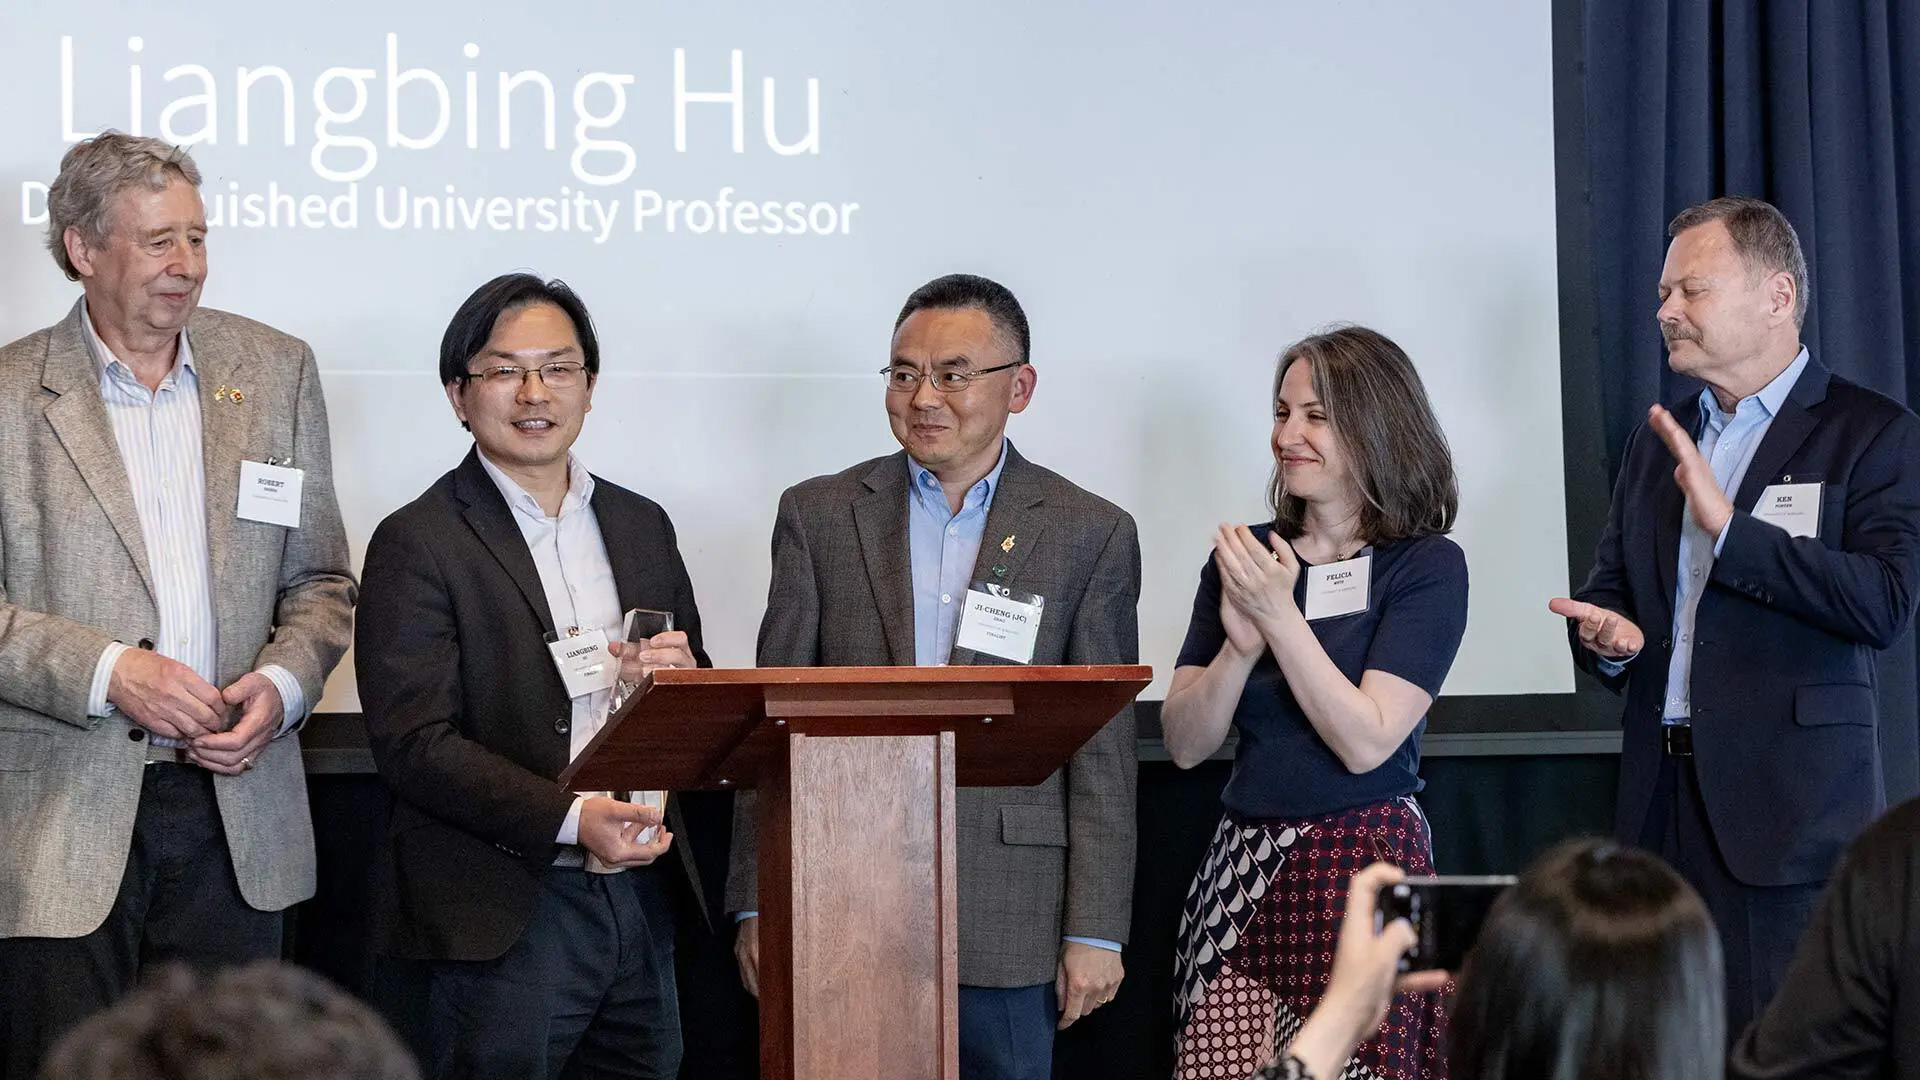 Distinguished University Professor Liangbing Hu (second from left) is honored at the Innovate Maryland Invention of the Year award event. Also pictured (from left), Professor Robert Briber, Department of Materials Science and Engineering Chair Ji-Cheng (JC) Zhao, UM Ventures Associate Director Felicia Metz, UM Ventures Executive Director Ken Porter.